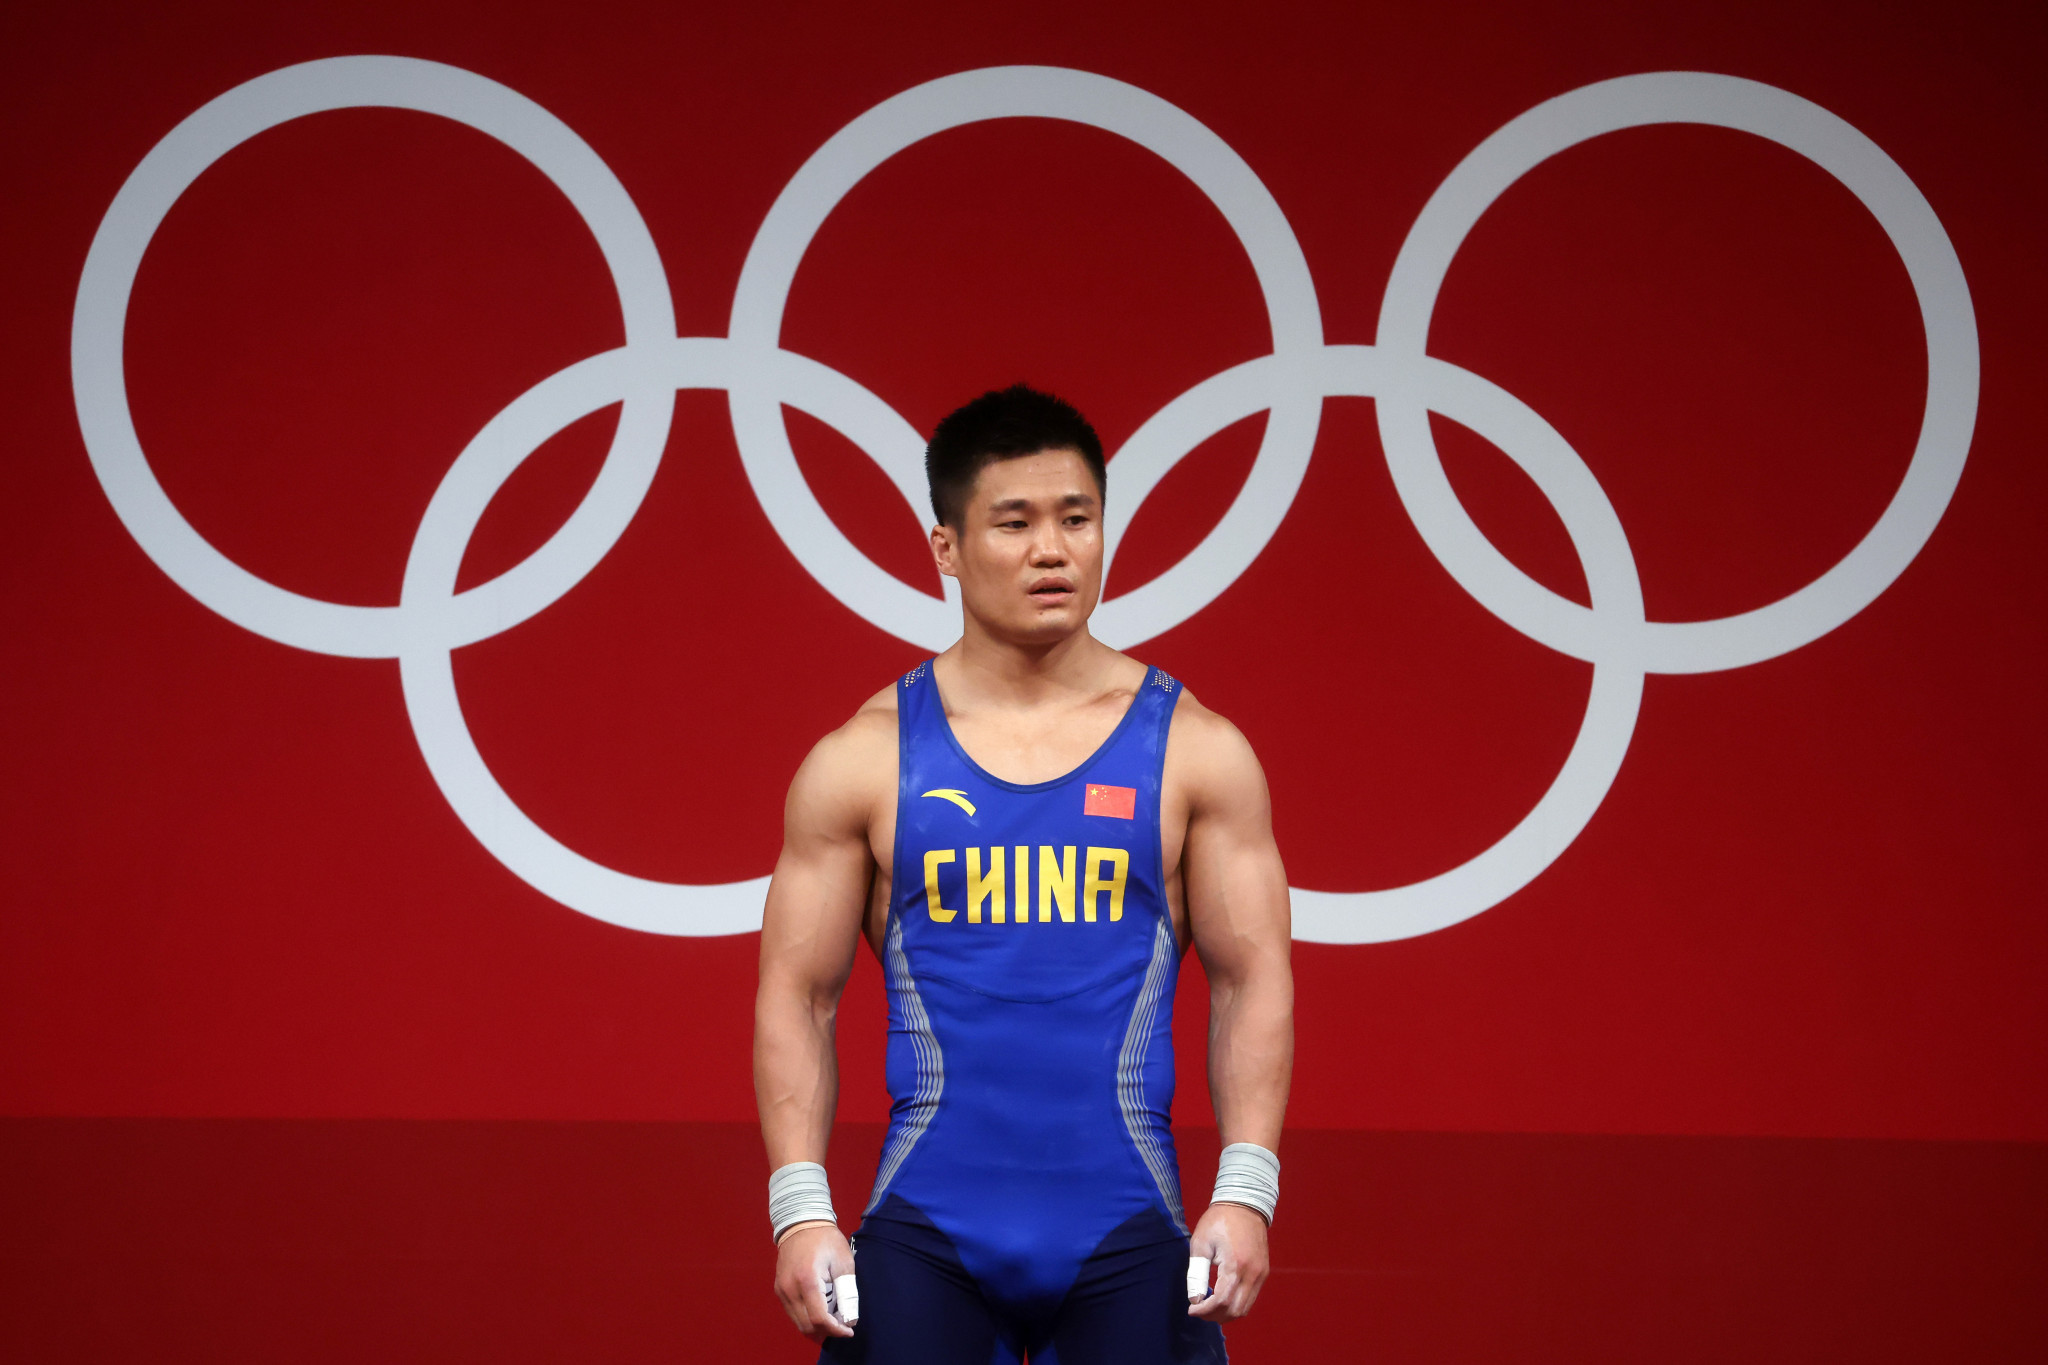 Triple Olympic weightlifting champion Lu wants to "prove innocence" after doping suspension